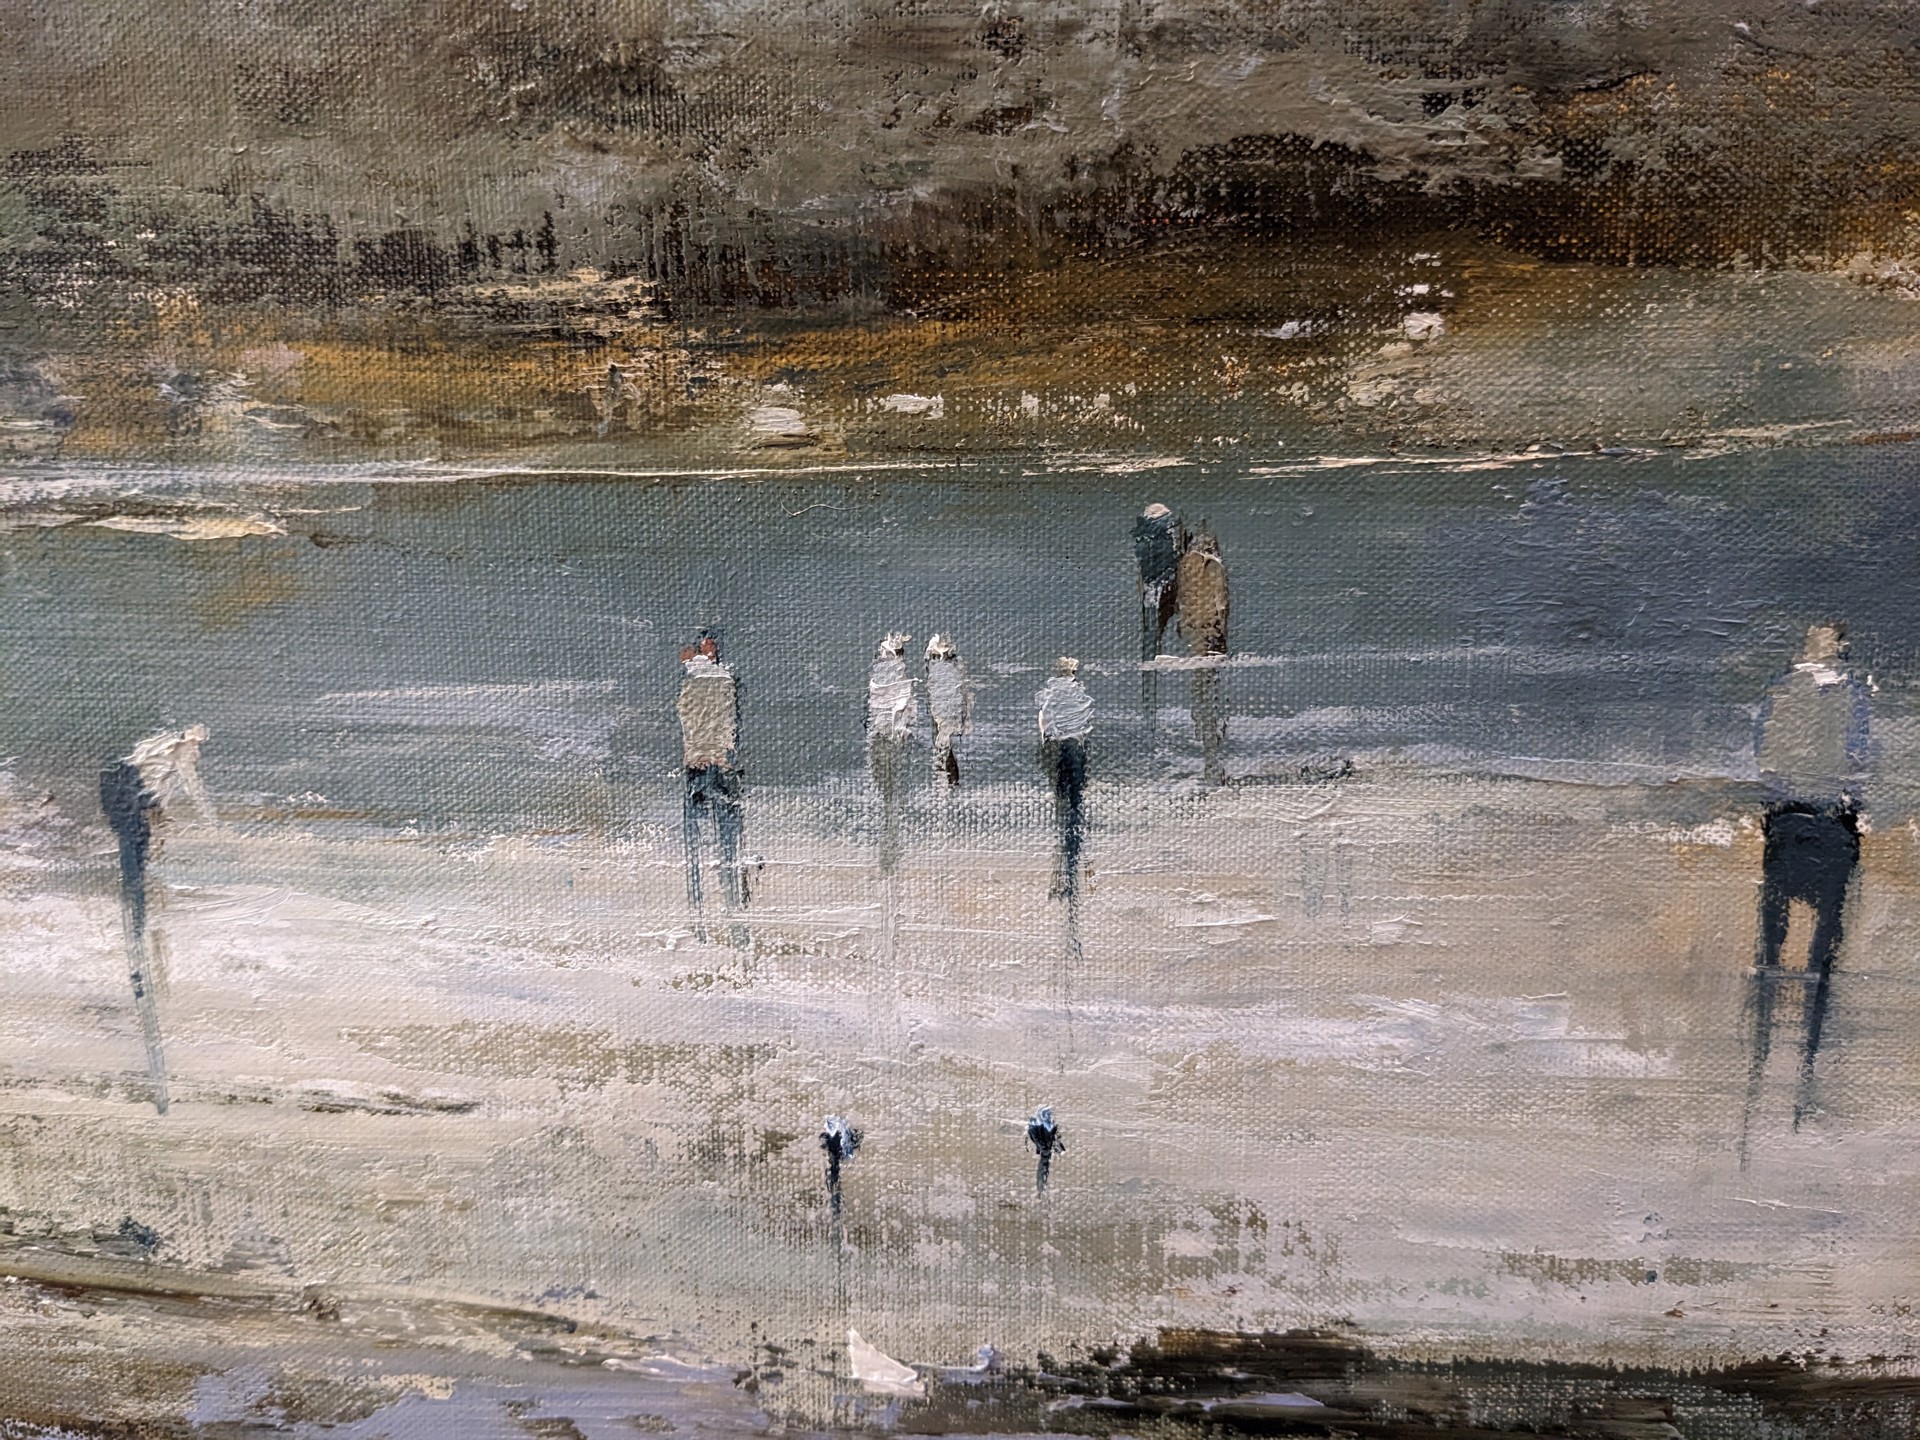 They glide like dancers in the wide hall by France Jodoin